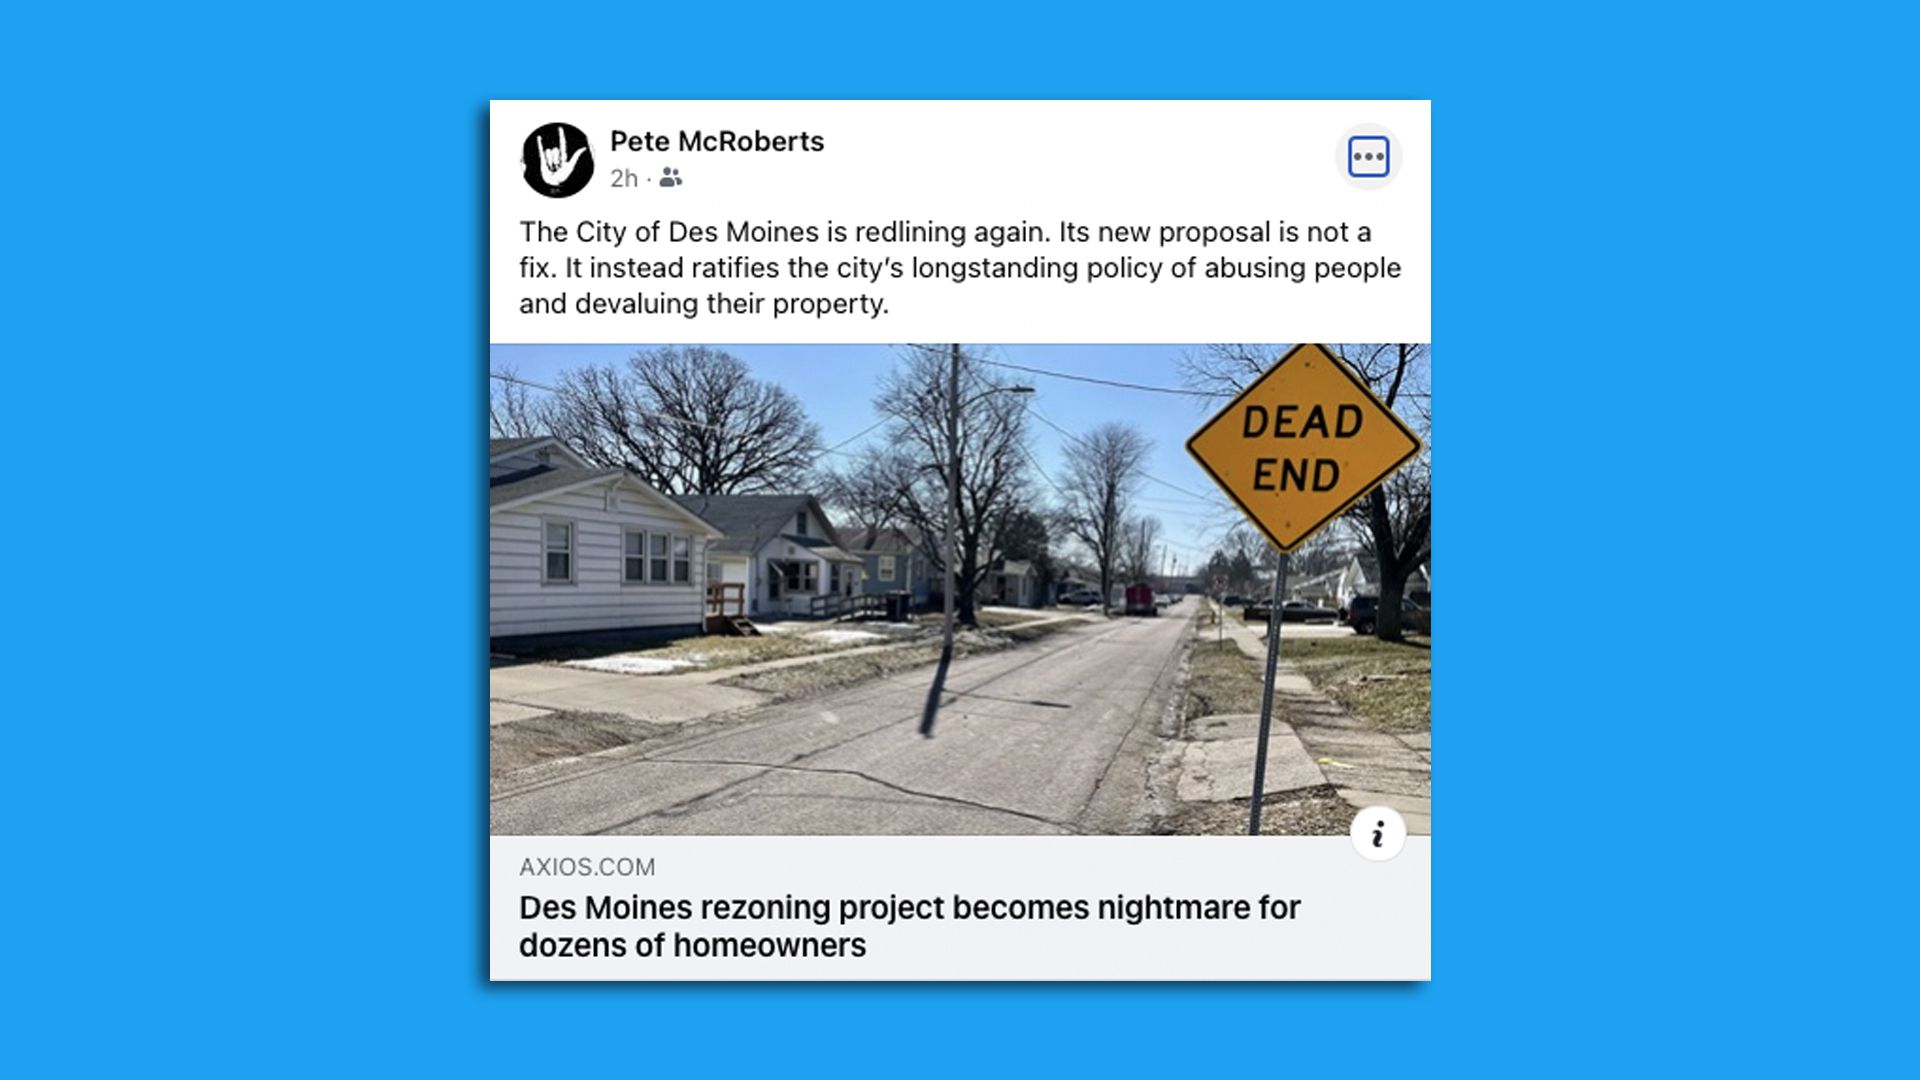 A tweet by West Des Moines attorney Pete McRoberts that accuses Des Moines of redlining.